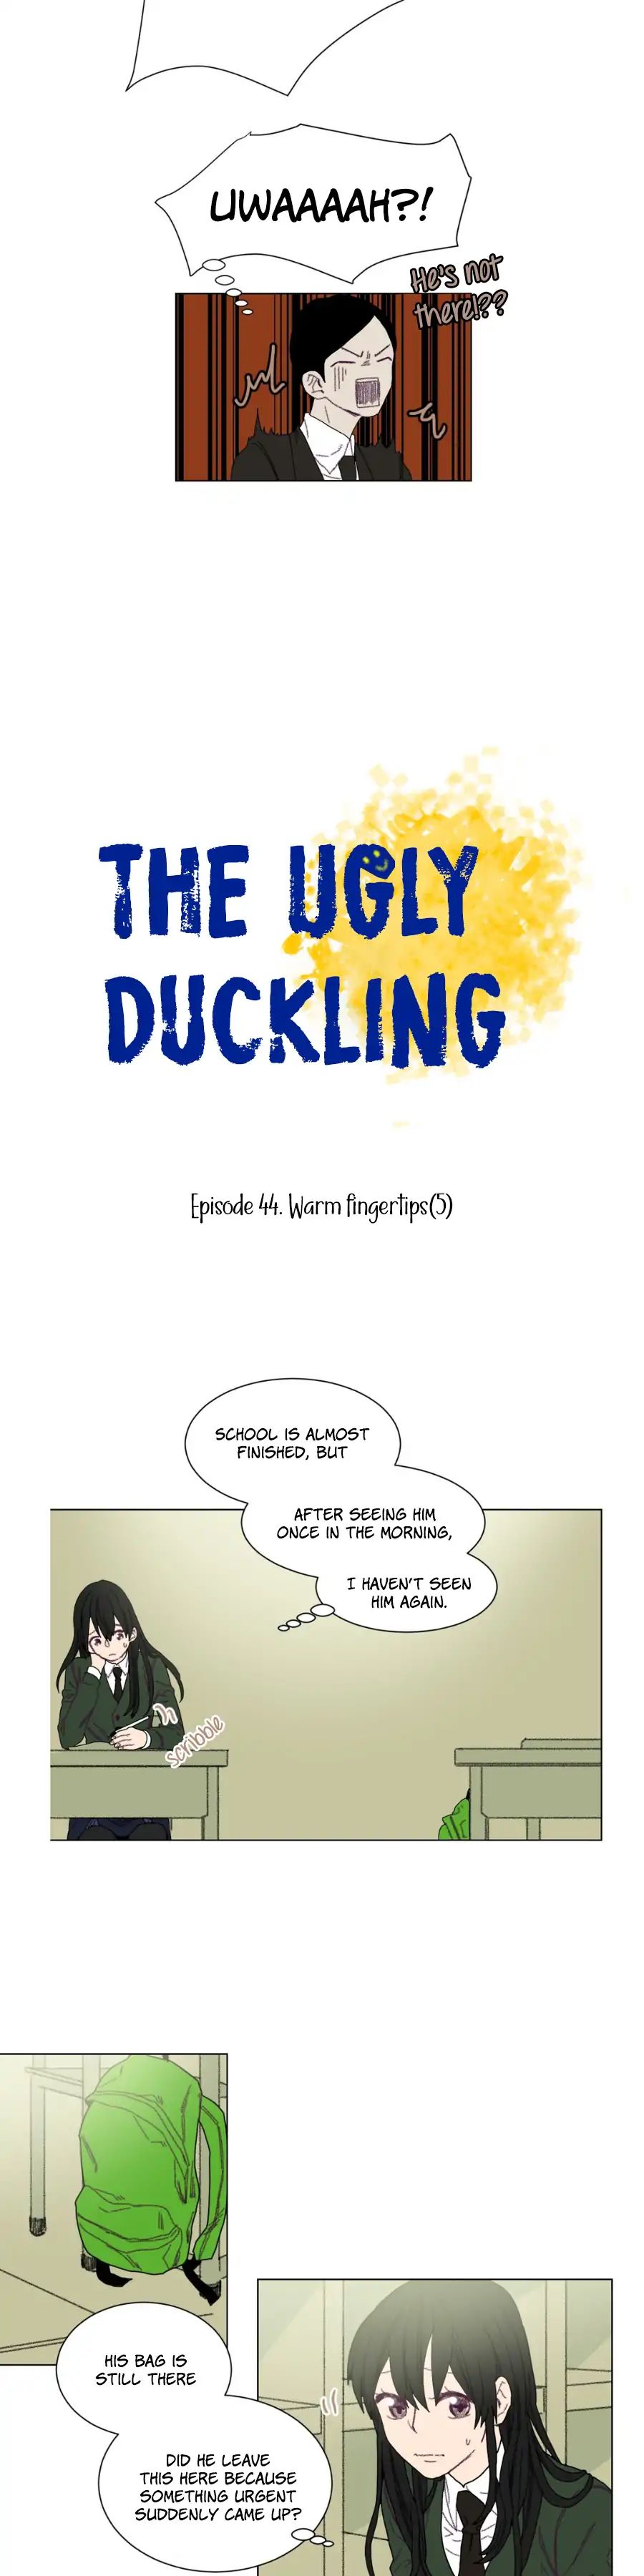 ugly_duckling_44_2